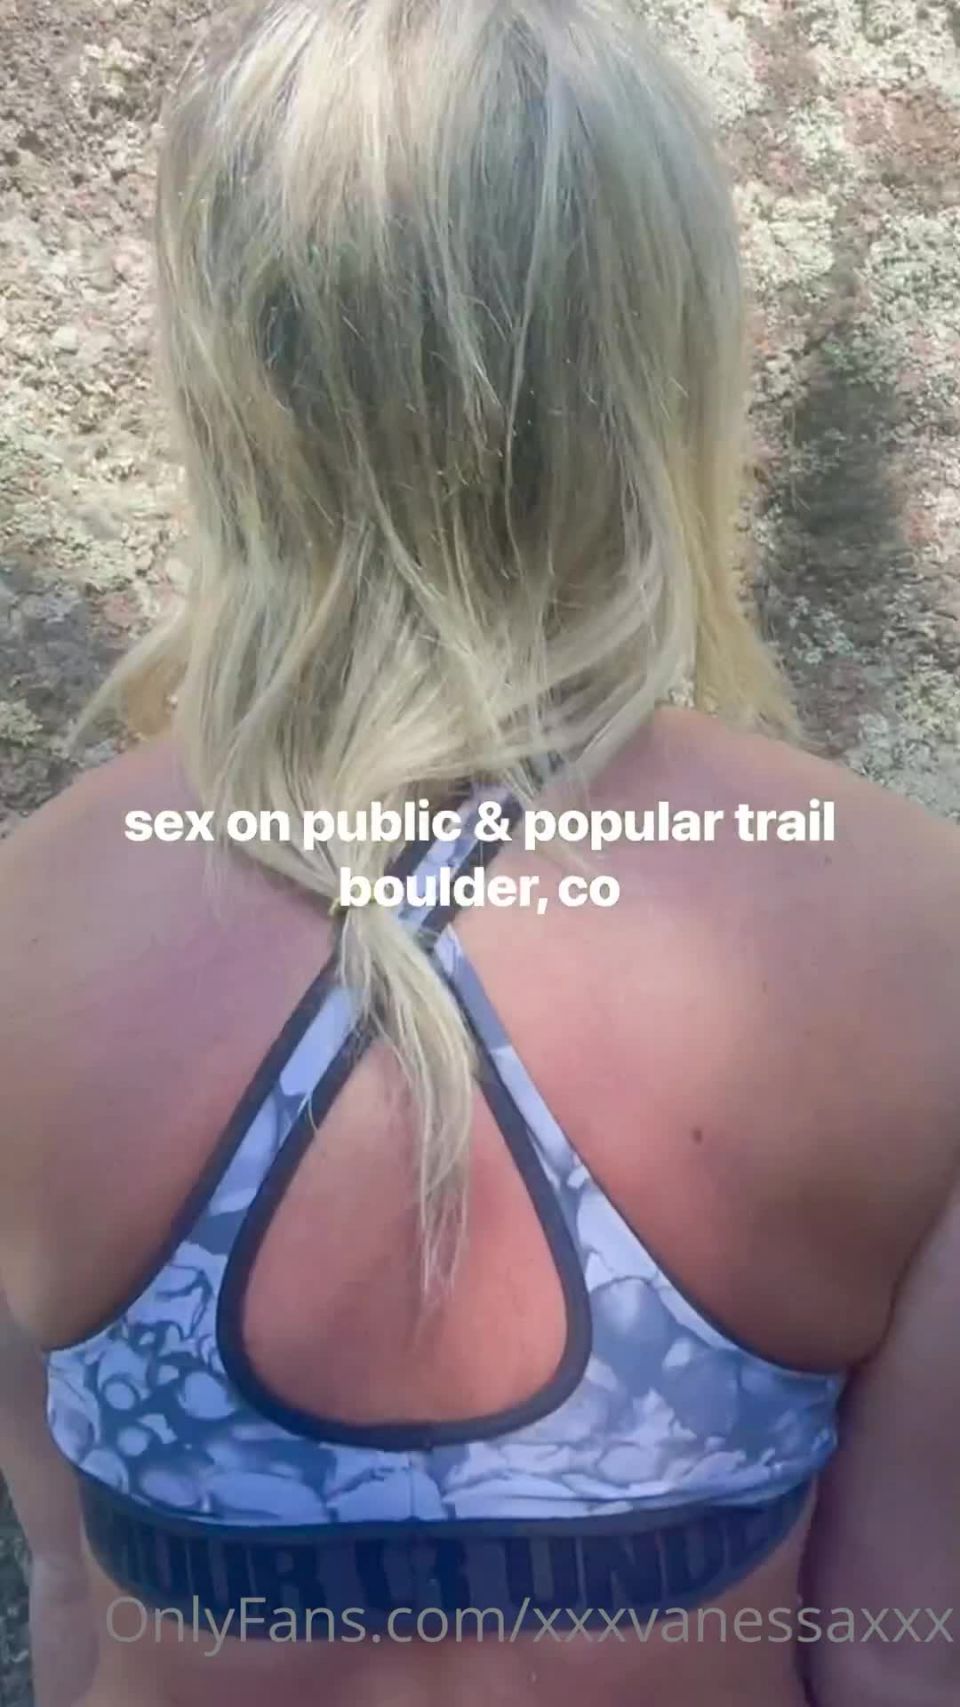 Xxxvanessaxxx - VANESSA () Xxxvanessaxxx so i went on a hike with my biology lab partner to celebrate finishing class and decided to take him out of the frien 06-08-2021